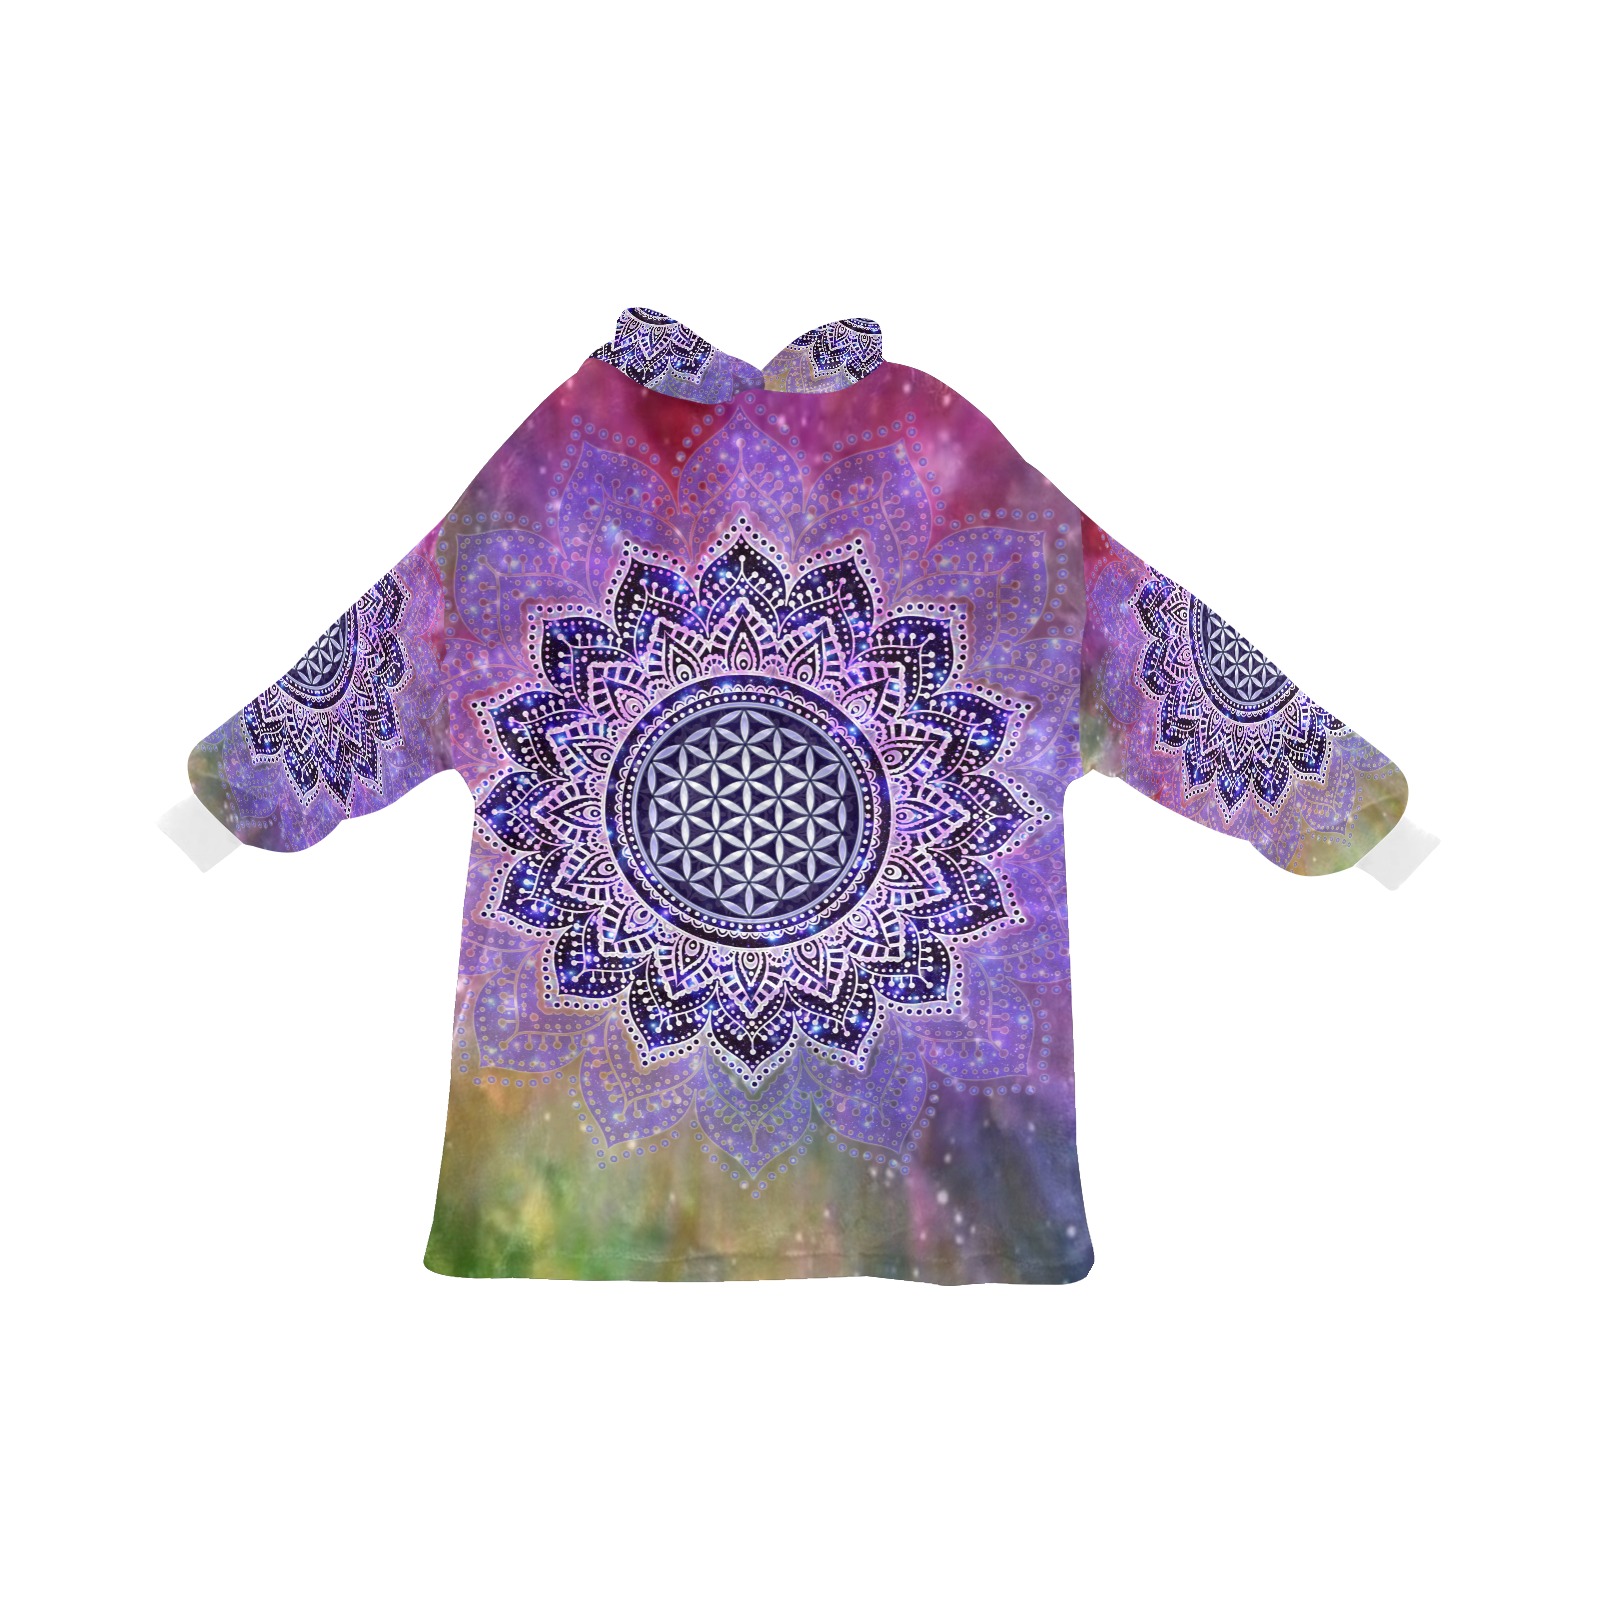 Flower Of Life Lotus Of India Galaxy Colored Blanket Hoodie for Women